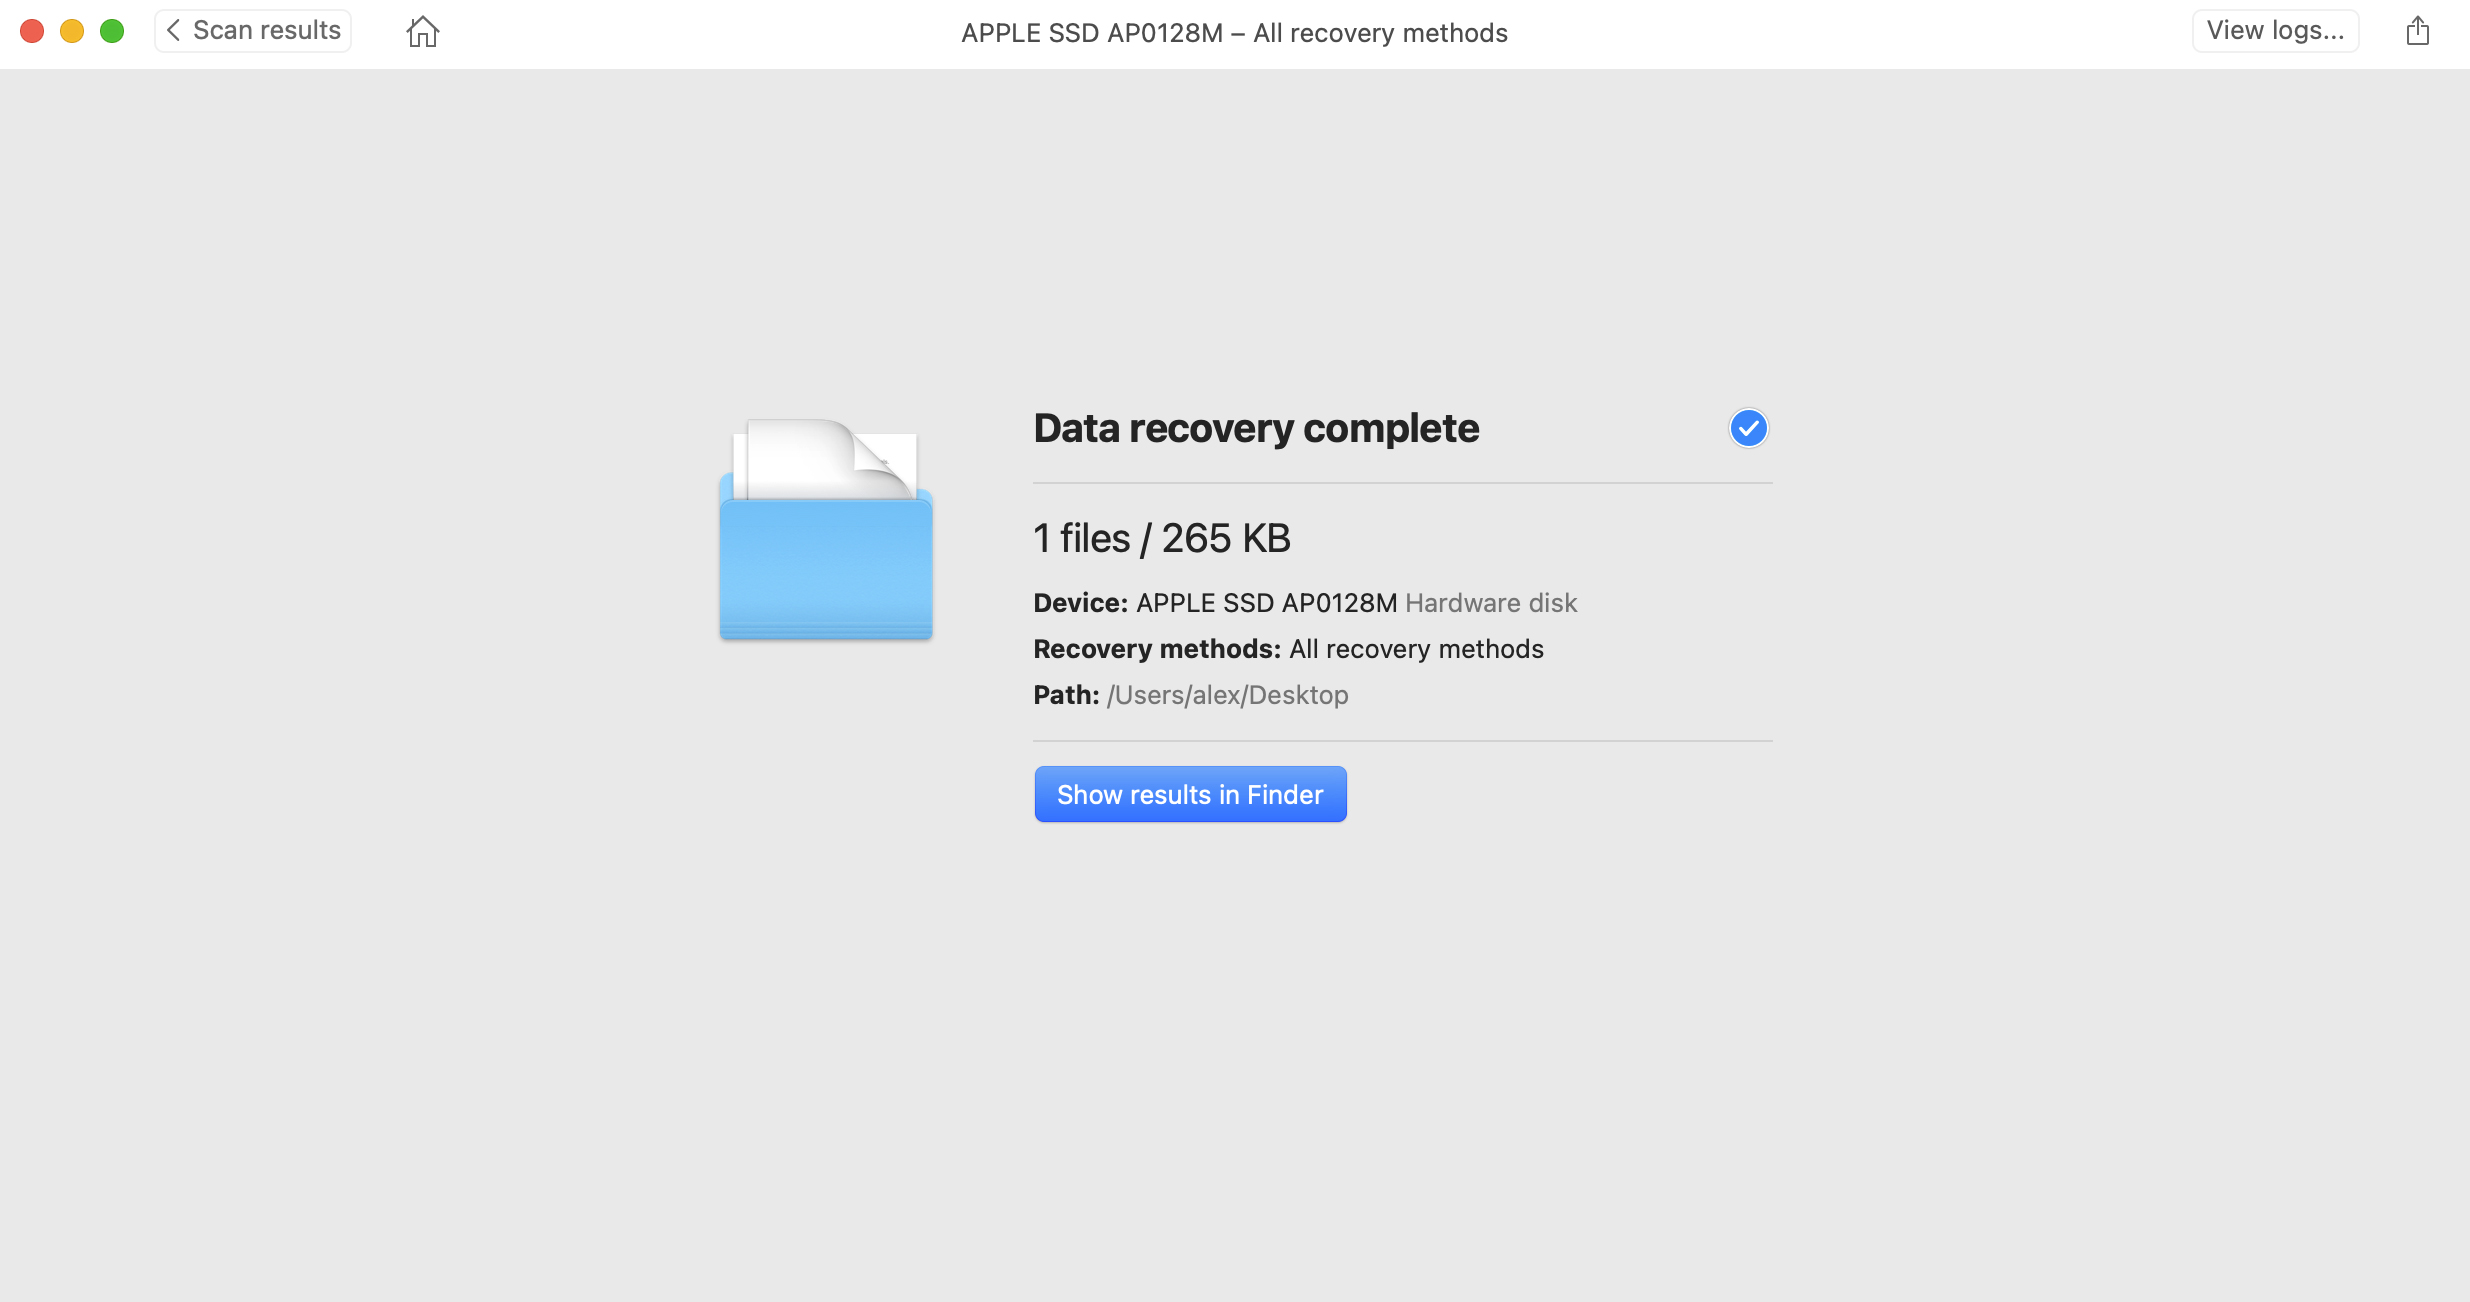 Recover deleted PPT files to the location you selected